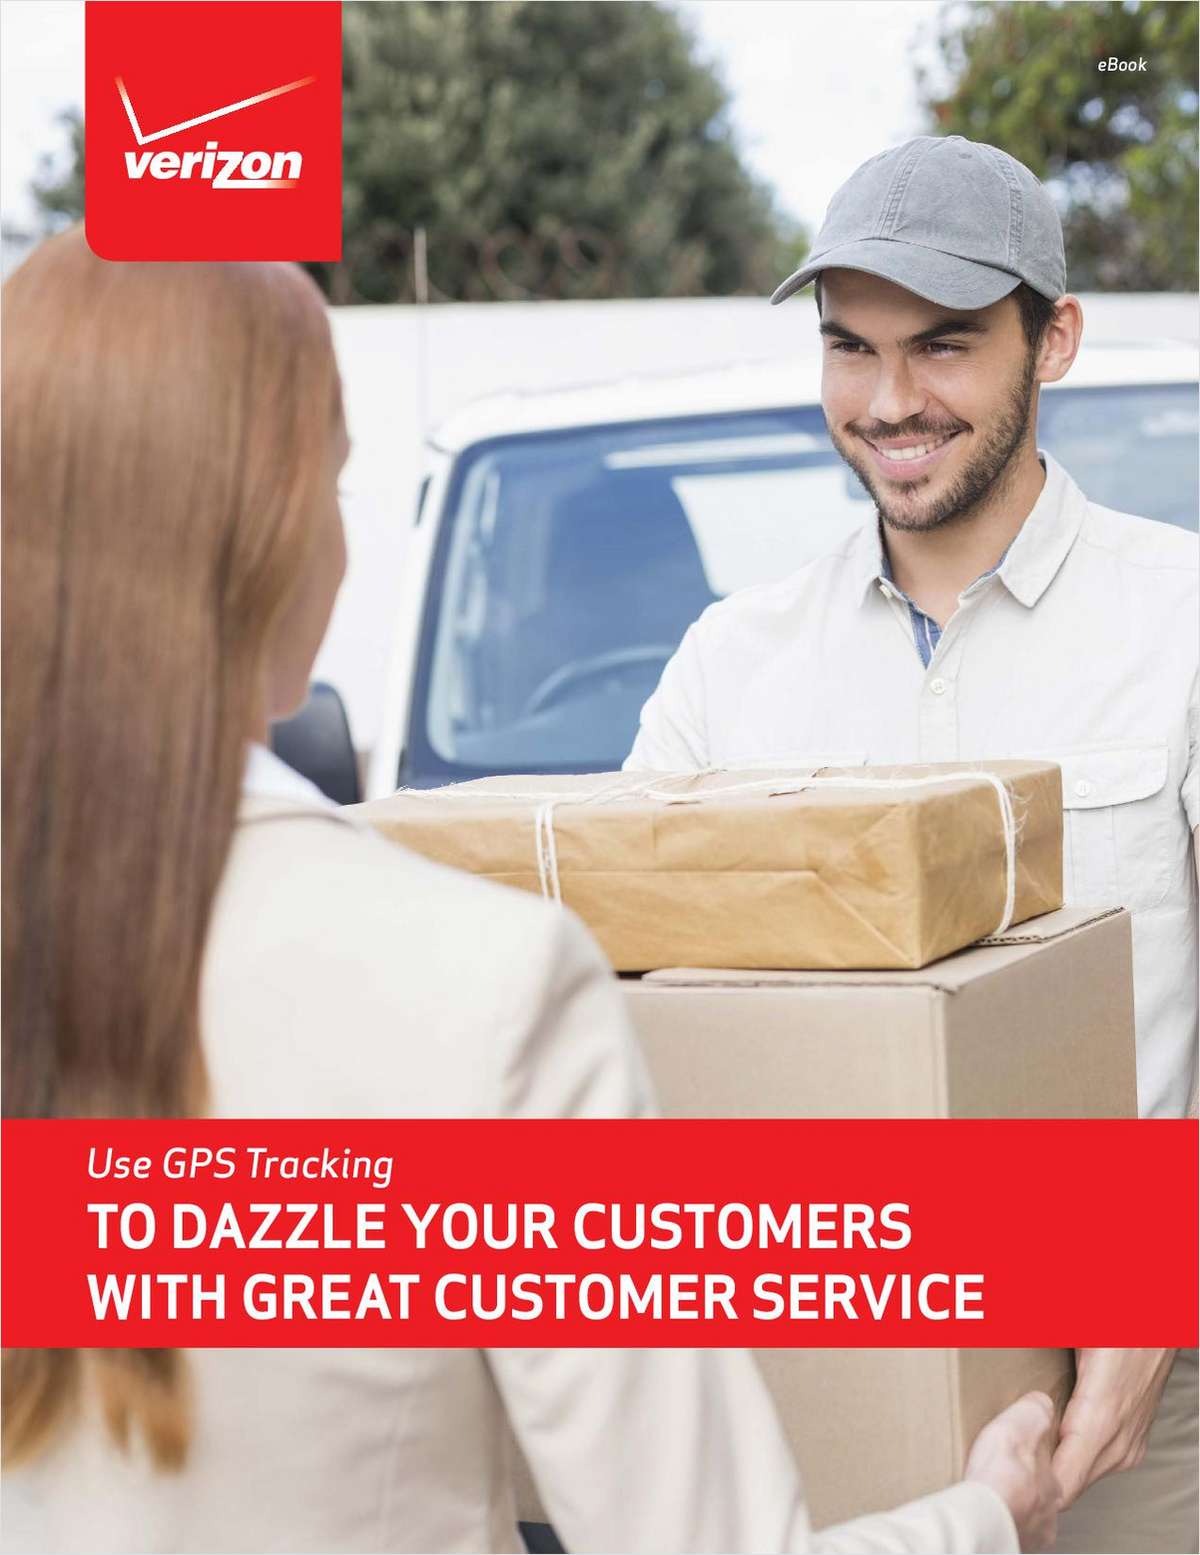 Use GPS Tracking To Dazzle Your Customers with Great Customer Service